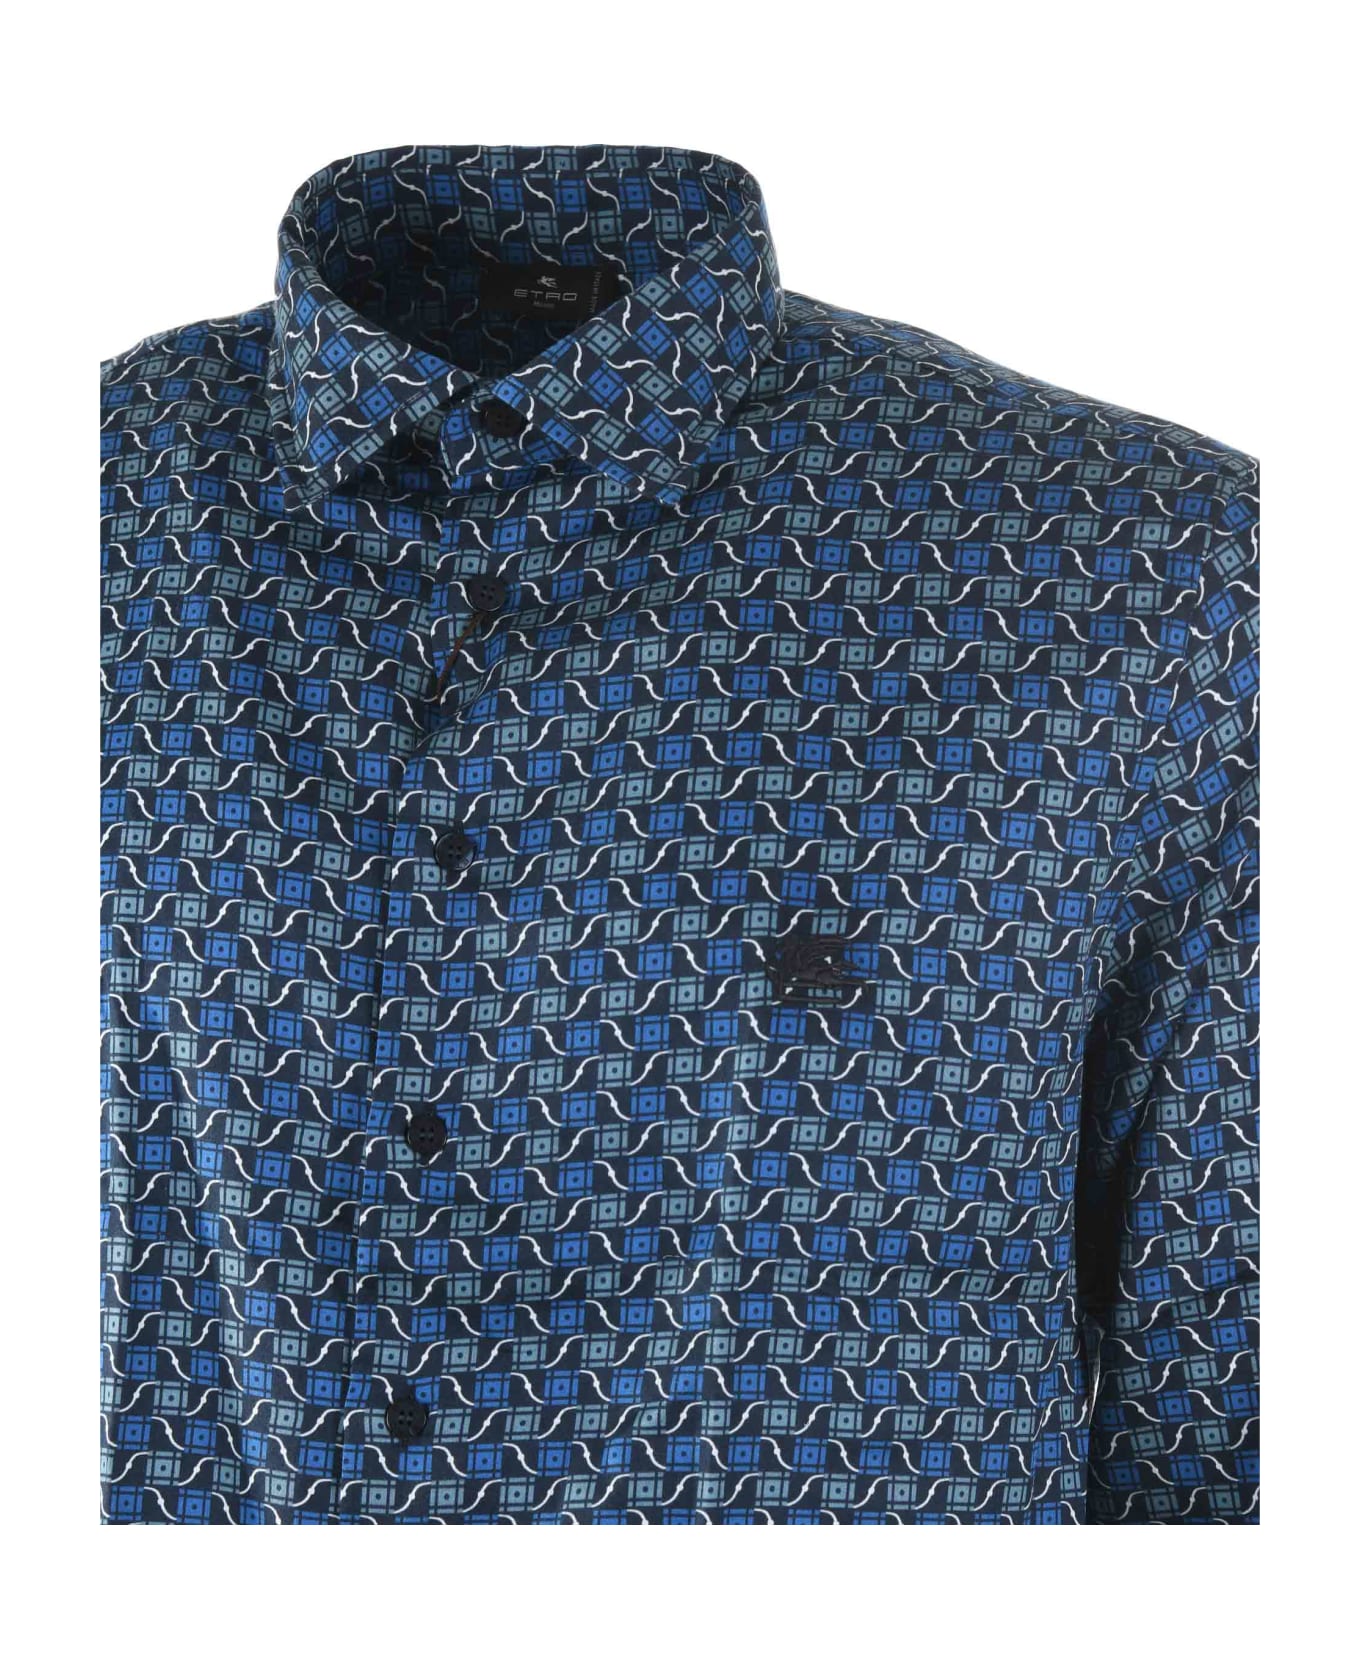 Etro All-over Patterned Long-sleeved Shirt Etro - Blu